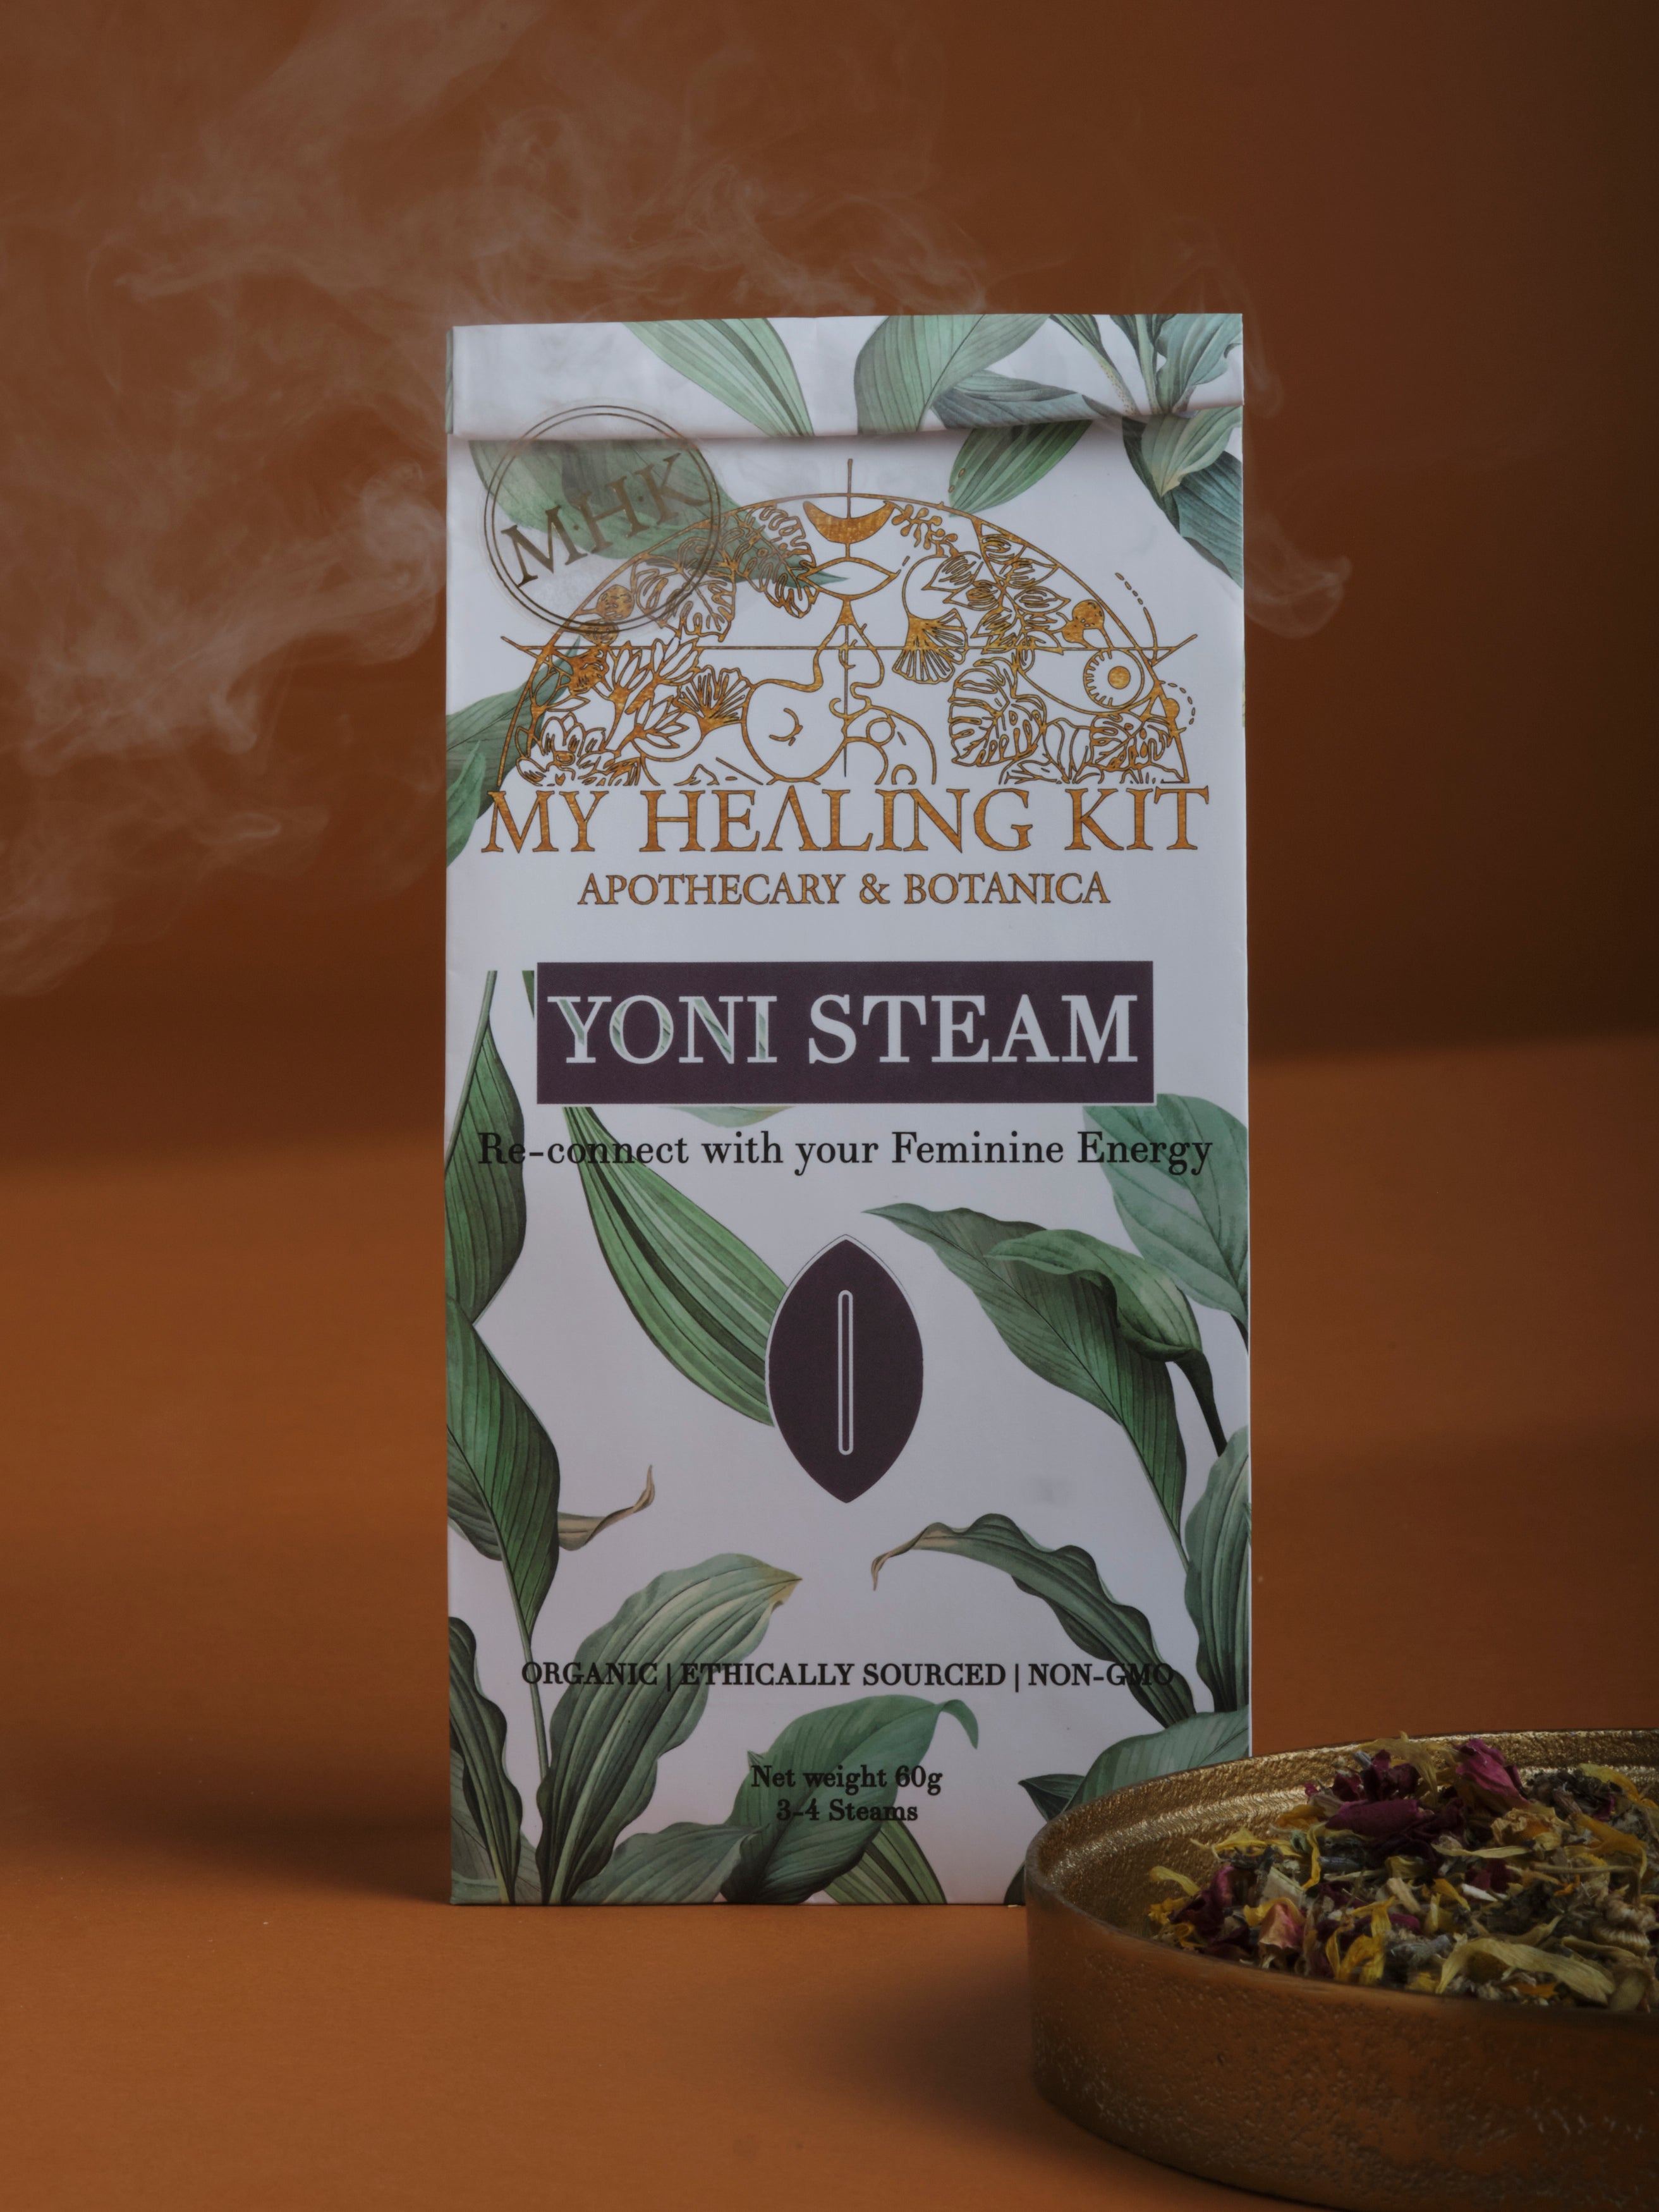 a tranquil setting for yoni steaming, a traditional wellness technique meant to enhance relaxation and good health in women.